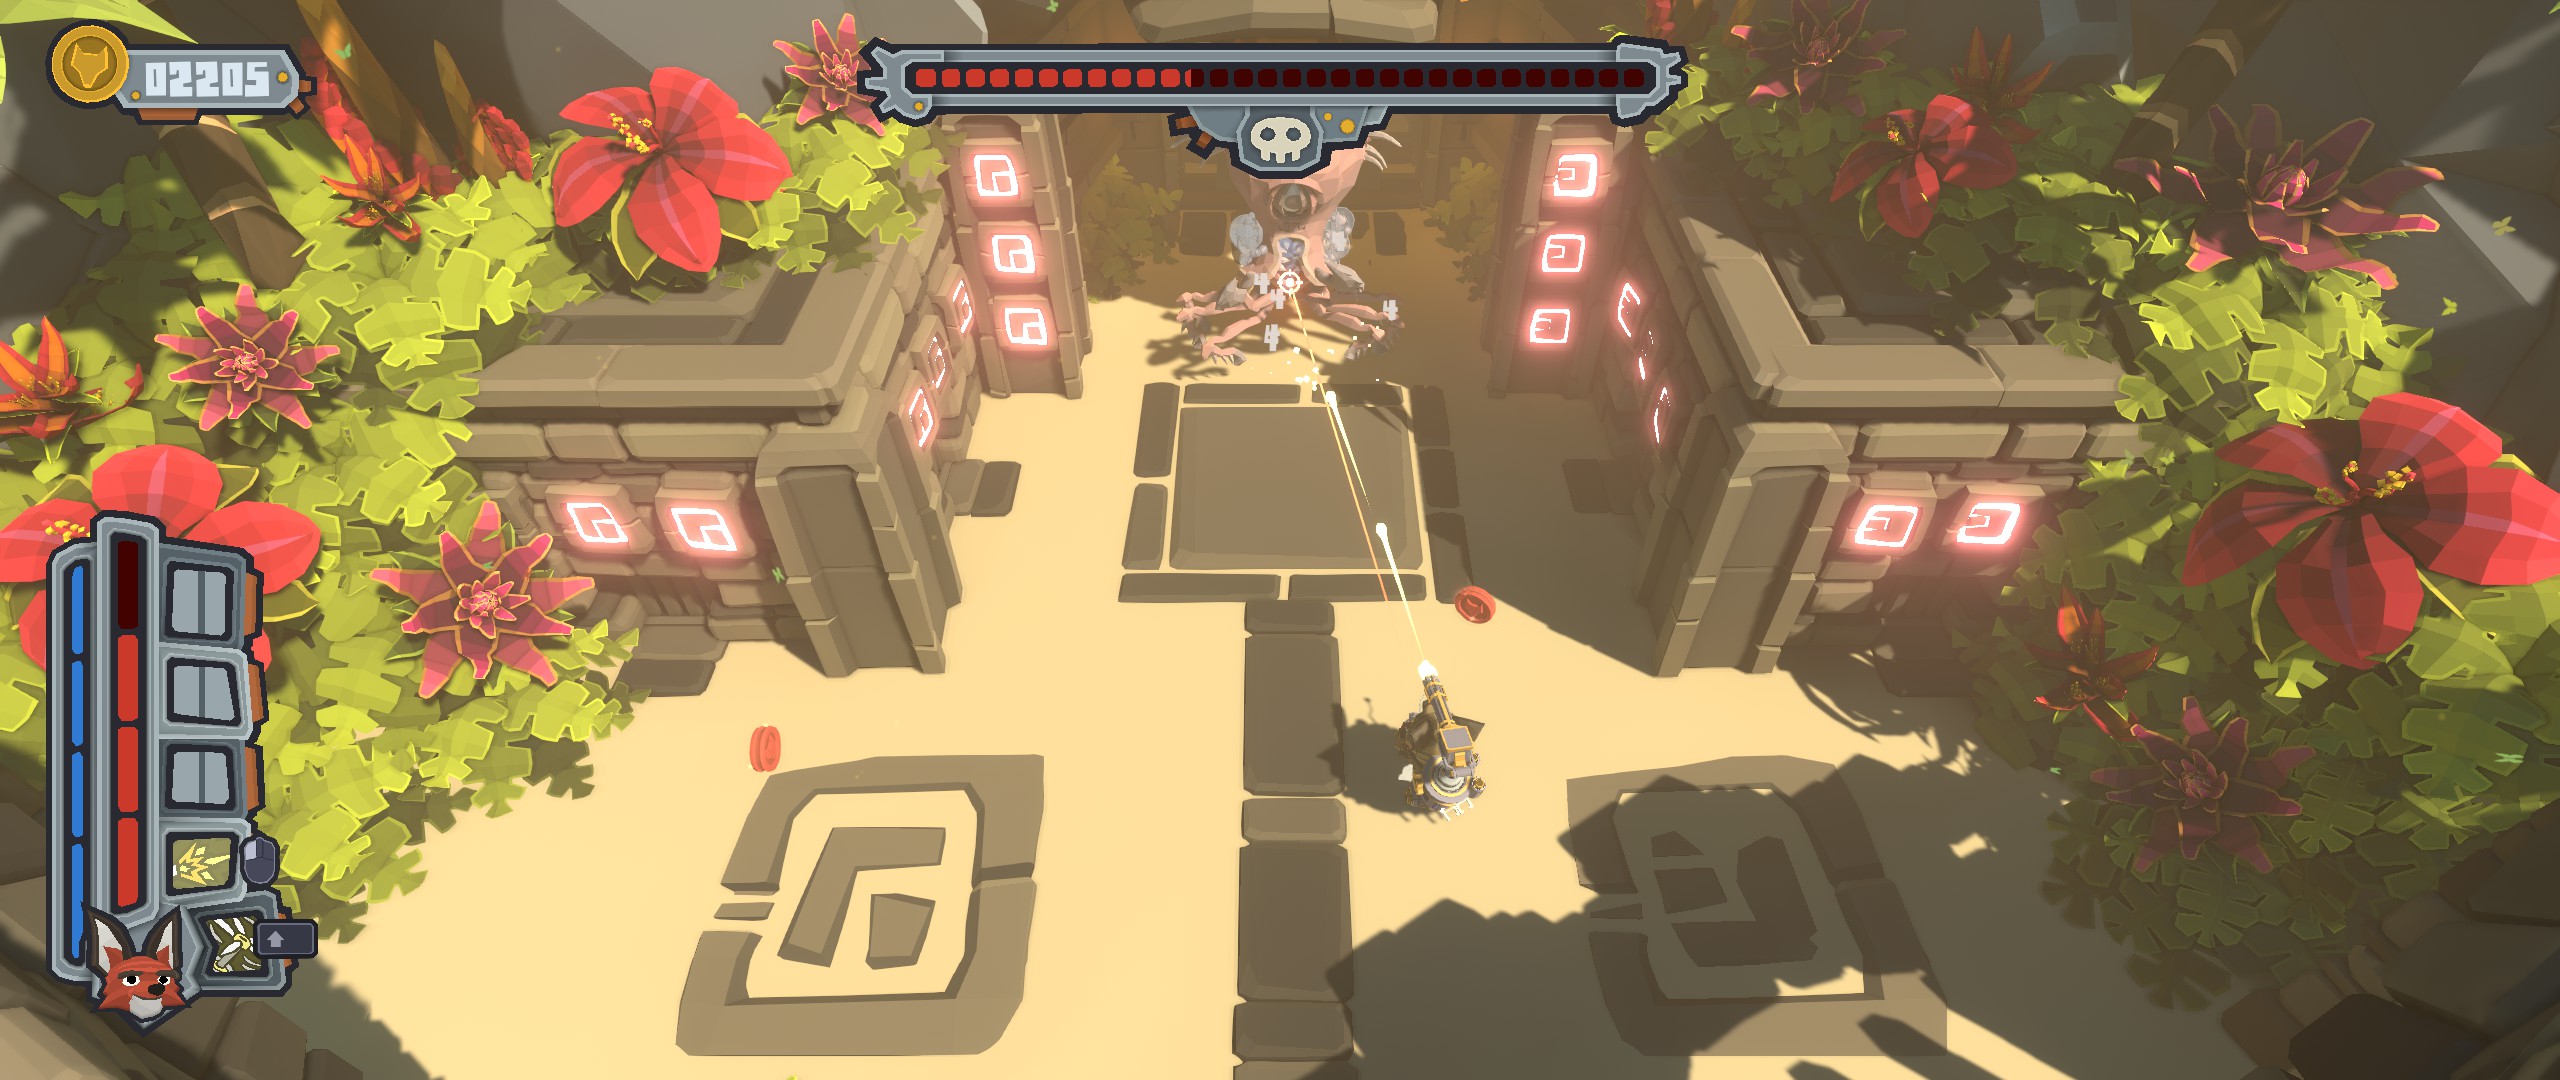 The first boss of the game. Notice the target symbol at the boss when using mouse and keyboard.